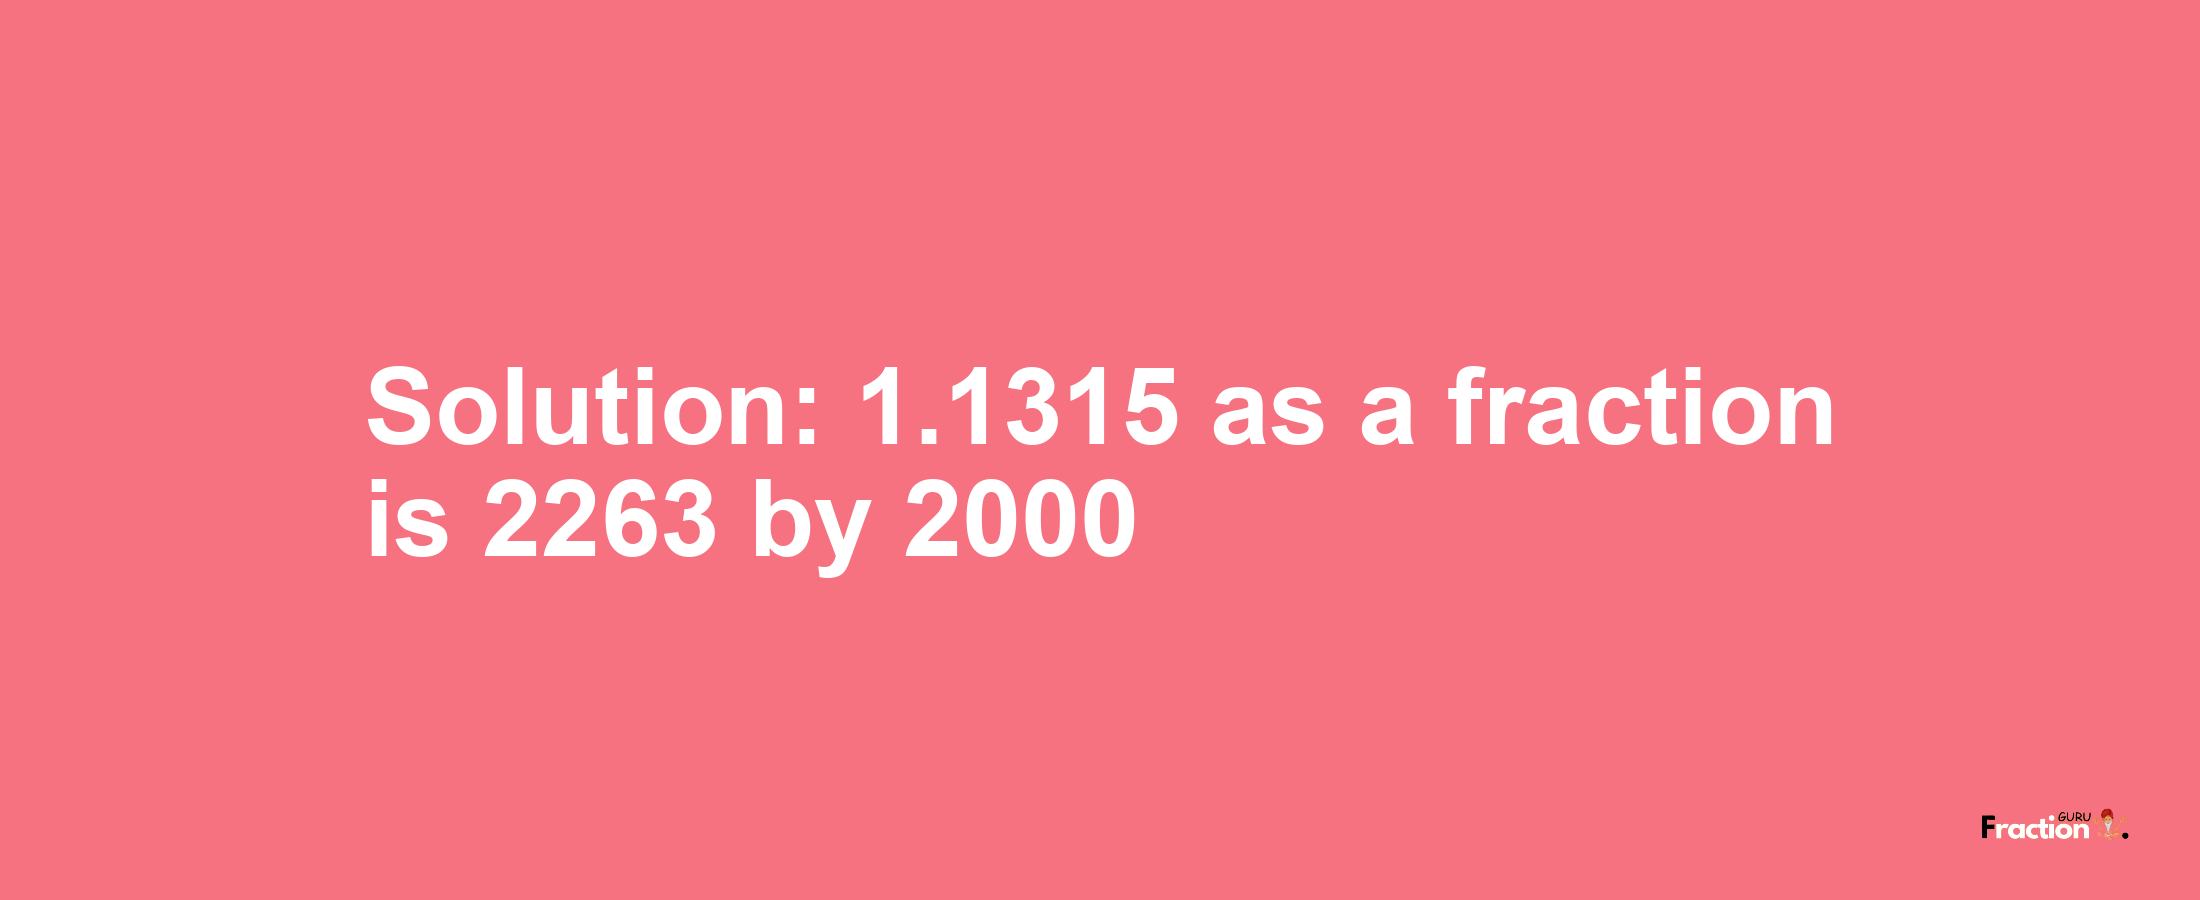 Solution:1.1315 as a fraction is 2263/2000